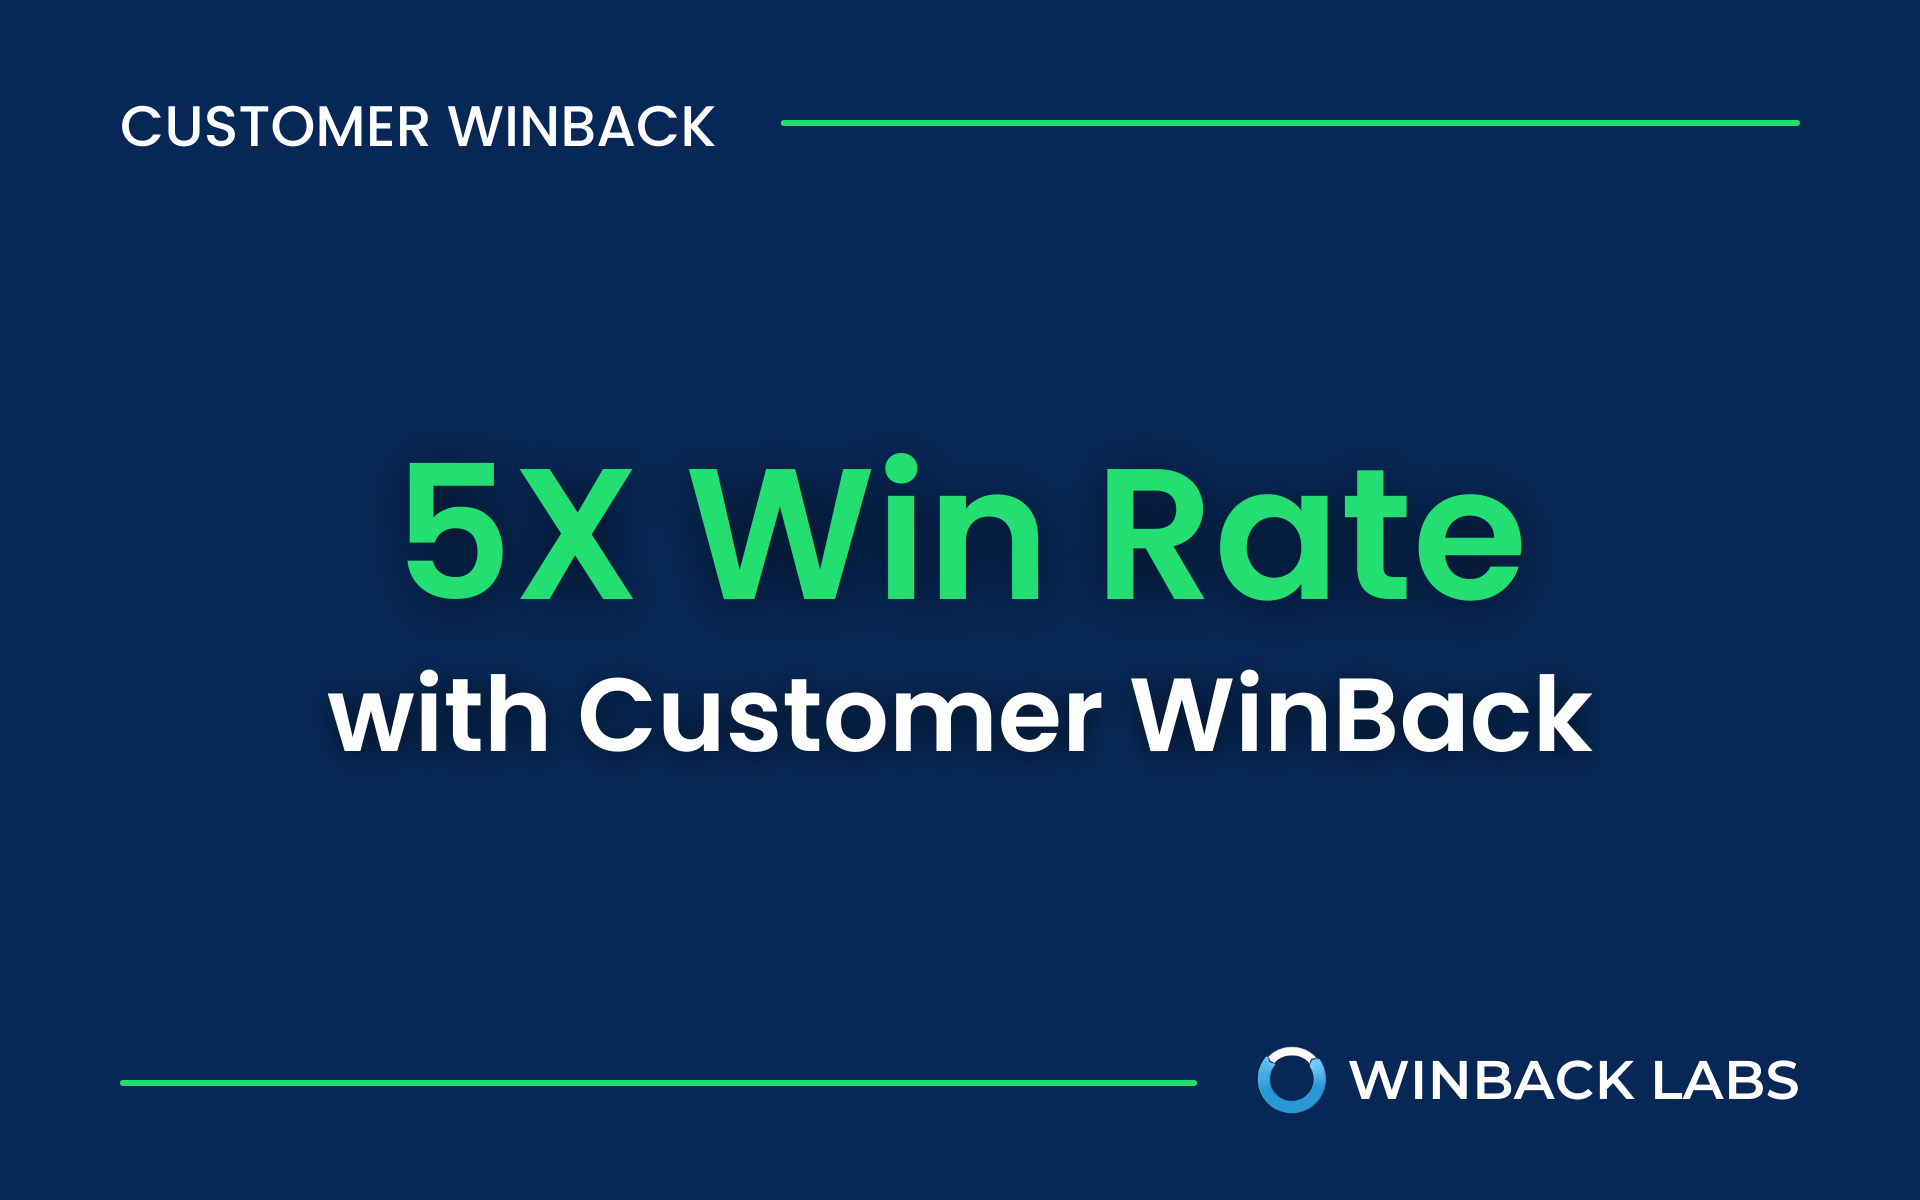 5X Better Win Rate with Customer WinBack